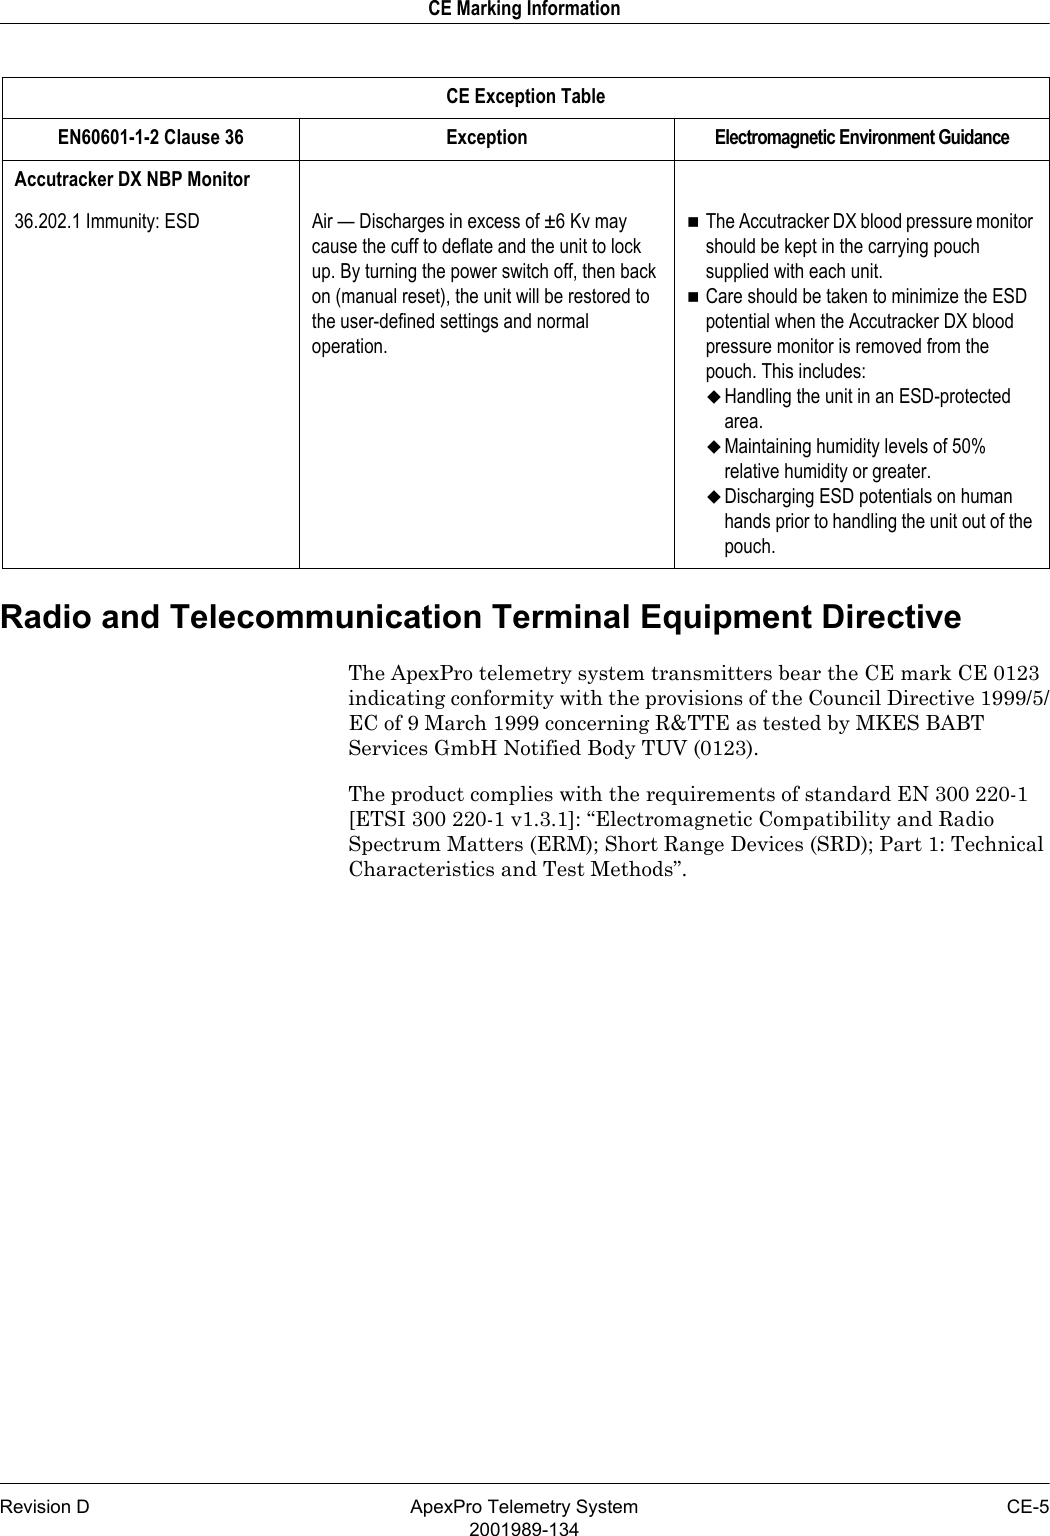 Revision D ApexPro Telemetry System CE-52001989-134CE Marking InformationRadio and Telecommunication Terminal Equipment DirectiveThe ApexPro telemetry system transmitters bear the CE mark CE 0123 indicating conformity with the provisions of the Council Directive 1999/5/EC of 9 March 1999 concerning R&amp;TTE as tested by MKES BABT Services GmbH Notified Body TUV (0123).The product complies with the requirements of standard EN 300 220-1 [ETSI 300 220-1 v1.3.1]: “Electromagnetic Compatibility and Radio Spectrum Matters (ERM); Short Range Devices (SRD); Part 1: Technical Characteristics and Test Methods”.Accutracker DX NBP Monitor36.202.1 Immunity: ESD Air — Discharges in excess of ±6 Kv may cause the cuff to deflate and the unit to lock up. By turning the power switch off, then back on (manual reset), the unit will be restored to the user-defined settings and normal operation.The Accutracker DX blood pressure monitor should be kept in the carrying pouch supplied with each unit.Care should be taken to minimize the ESD potential when the Accutracker DX blood pressure monitor is removed from the pouch. This includes:Handling the unit in an ESD-protected area.Maintaining humidity levels of 50% relative humidity or greater.Discharging ESD potentials on human hands prior to handling the unit out of the pouch.CE Exception TableEN60601-1-2 Clause 36 Exception Electromagnetic Environment Guidance